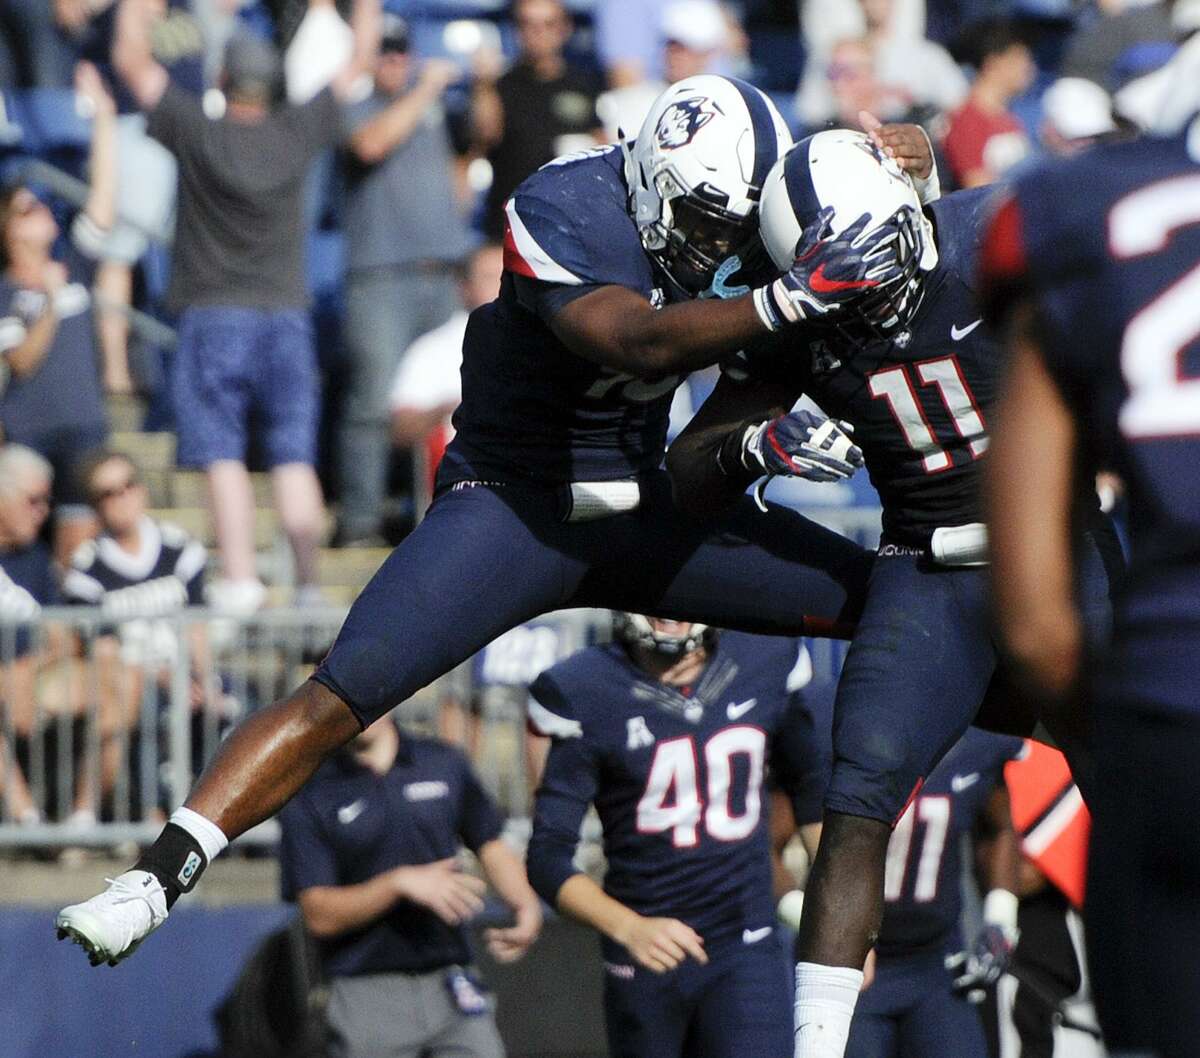 UConn’s Cameron Hairston (87) and Nate Hopkins (11) celebrate after Saturday’s win over Tulsa.